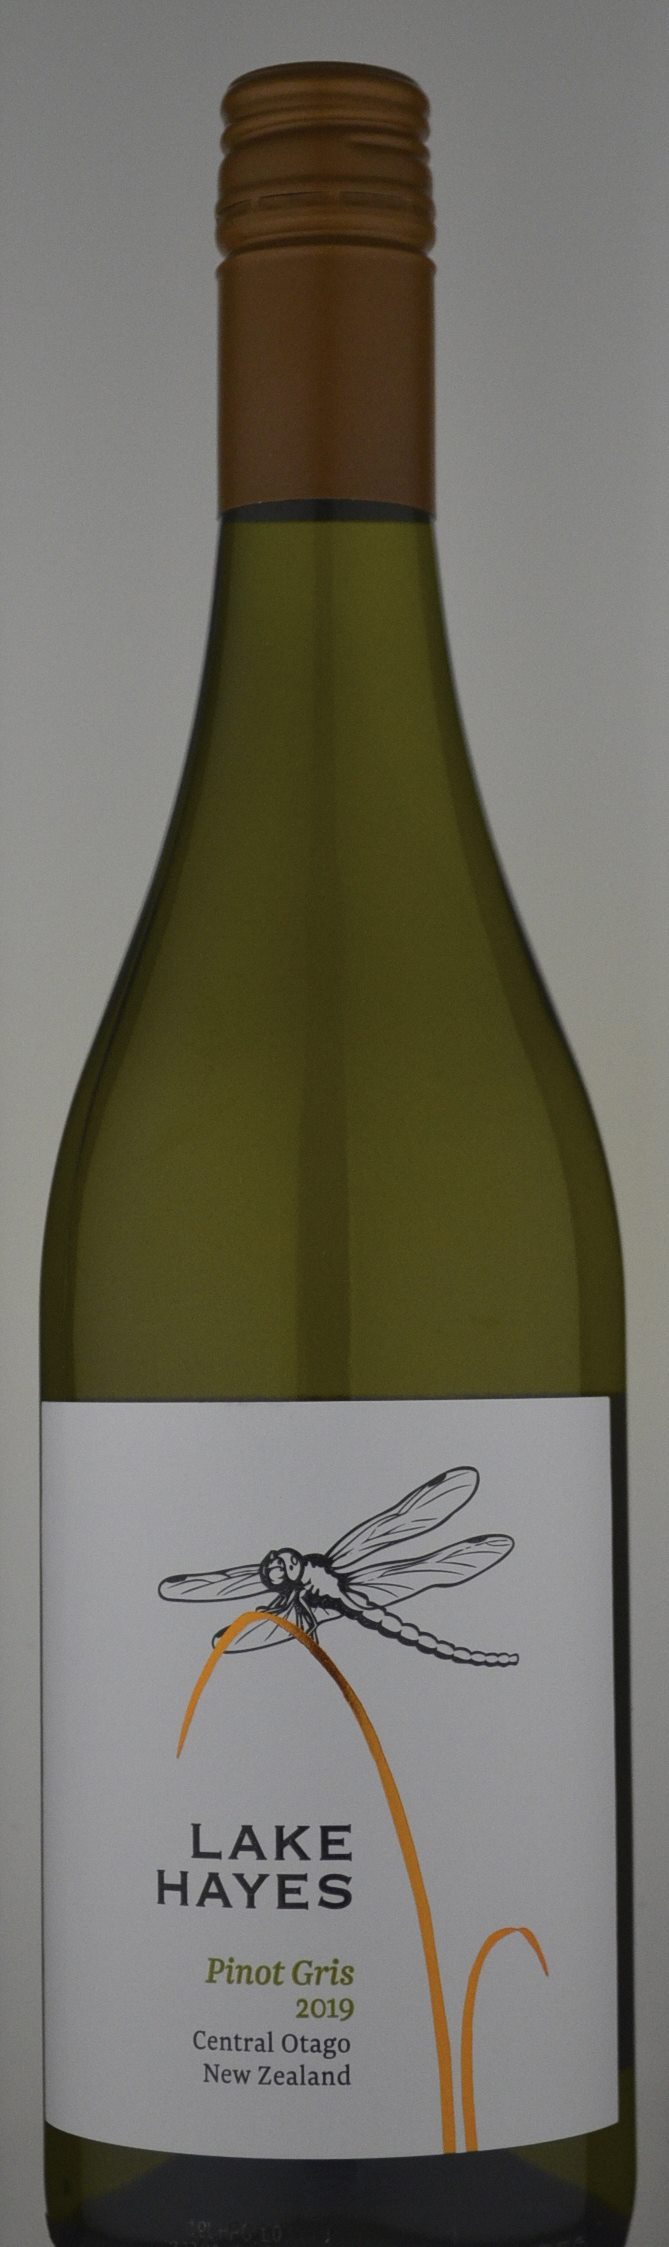 Amisfield Lake Hayes Pinot Gris 2019